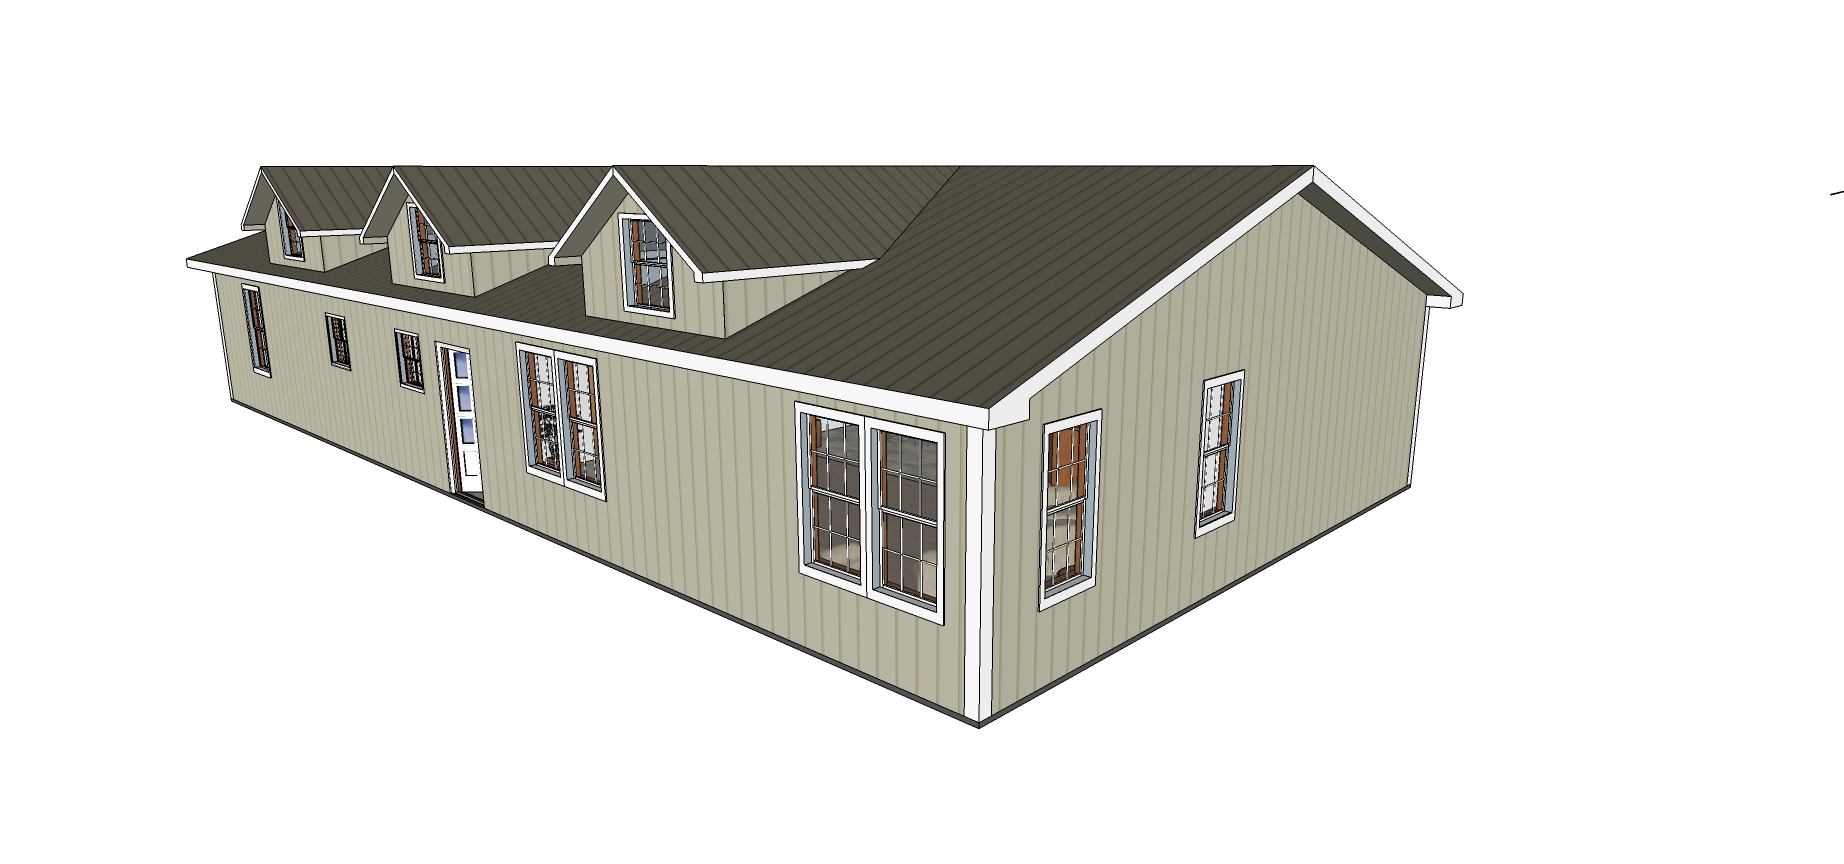 Metal home designs and plans from Worldwide Steel Buildings.